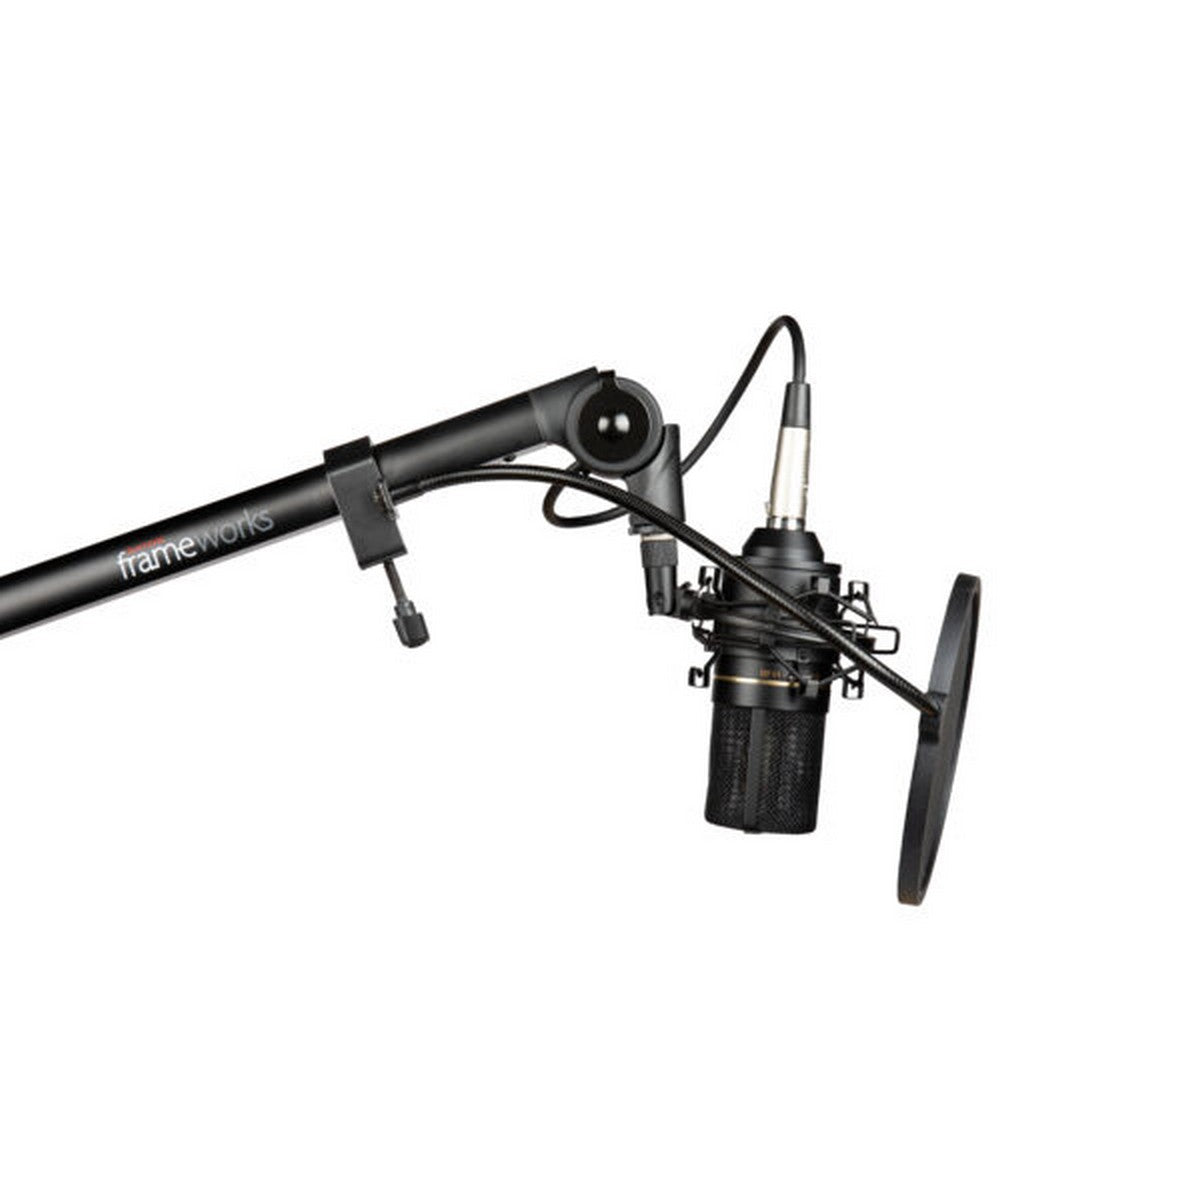 Gator GFW-BROADCASTKIT1 Frameworks All-In-One Accessory Kit for Podcasts/Broadcasts/Content Creation